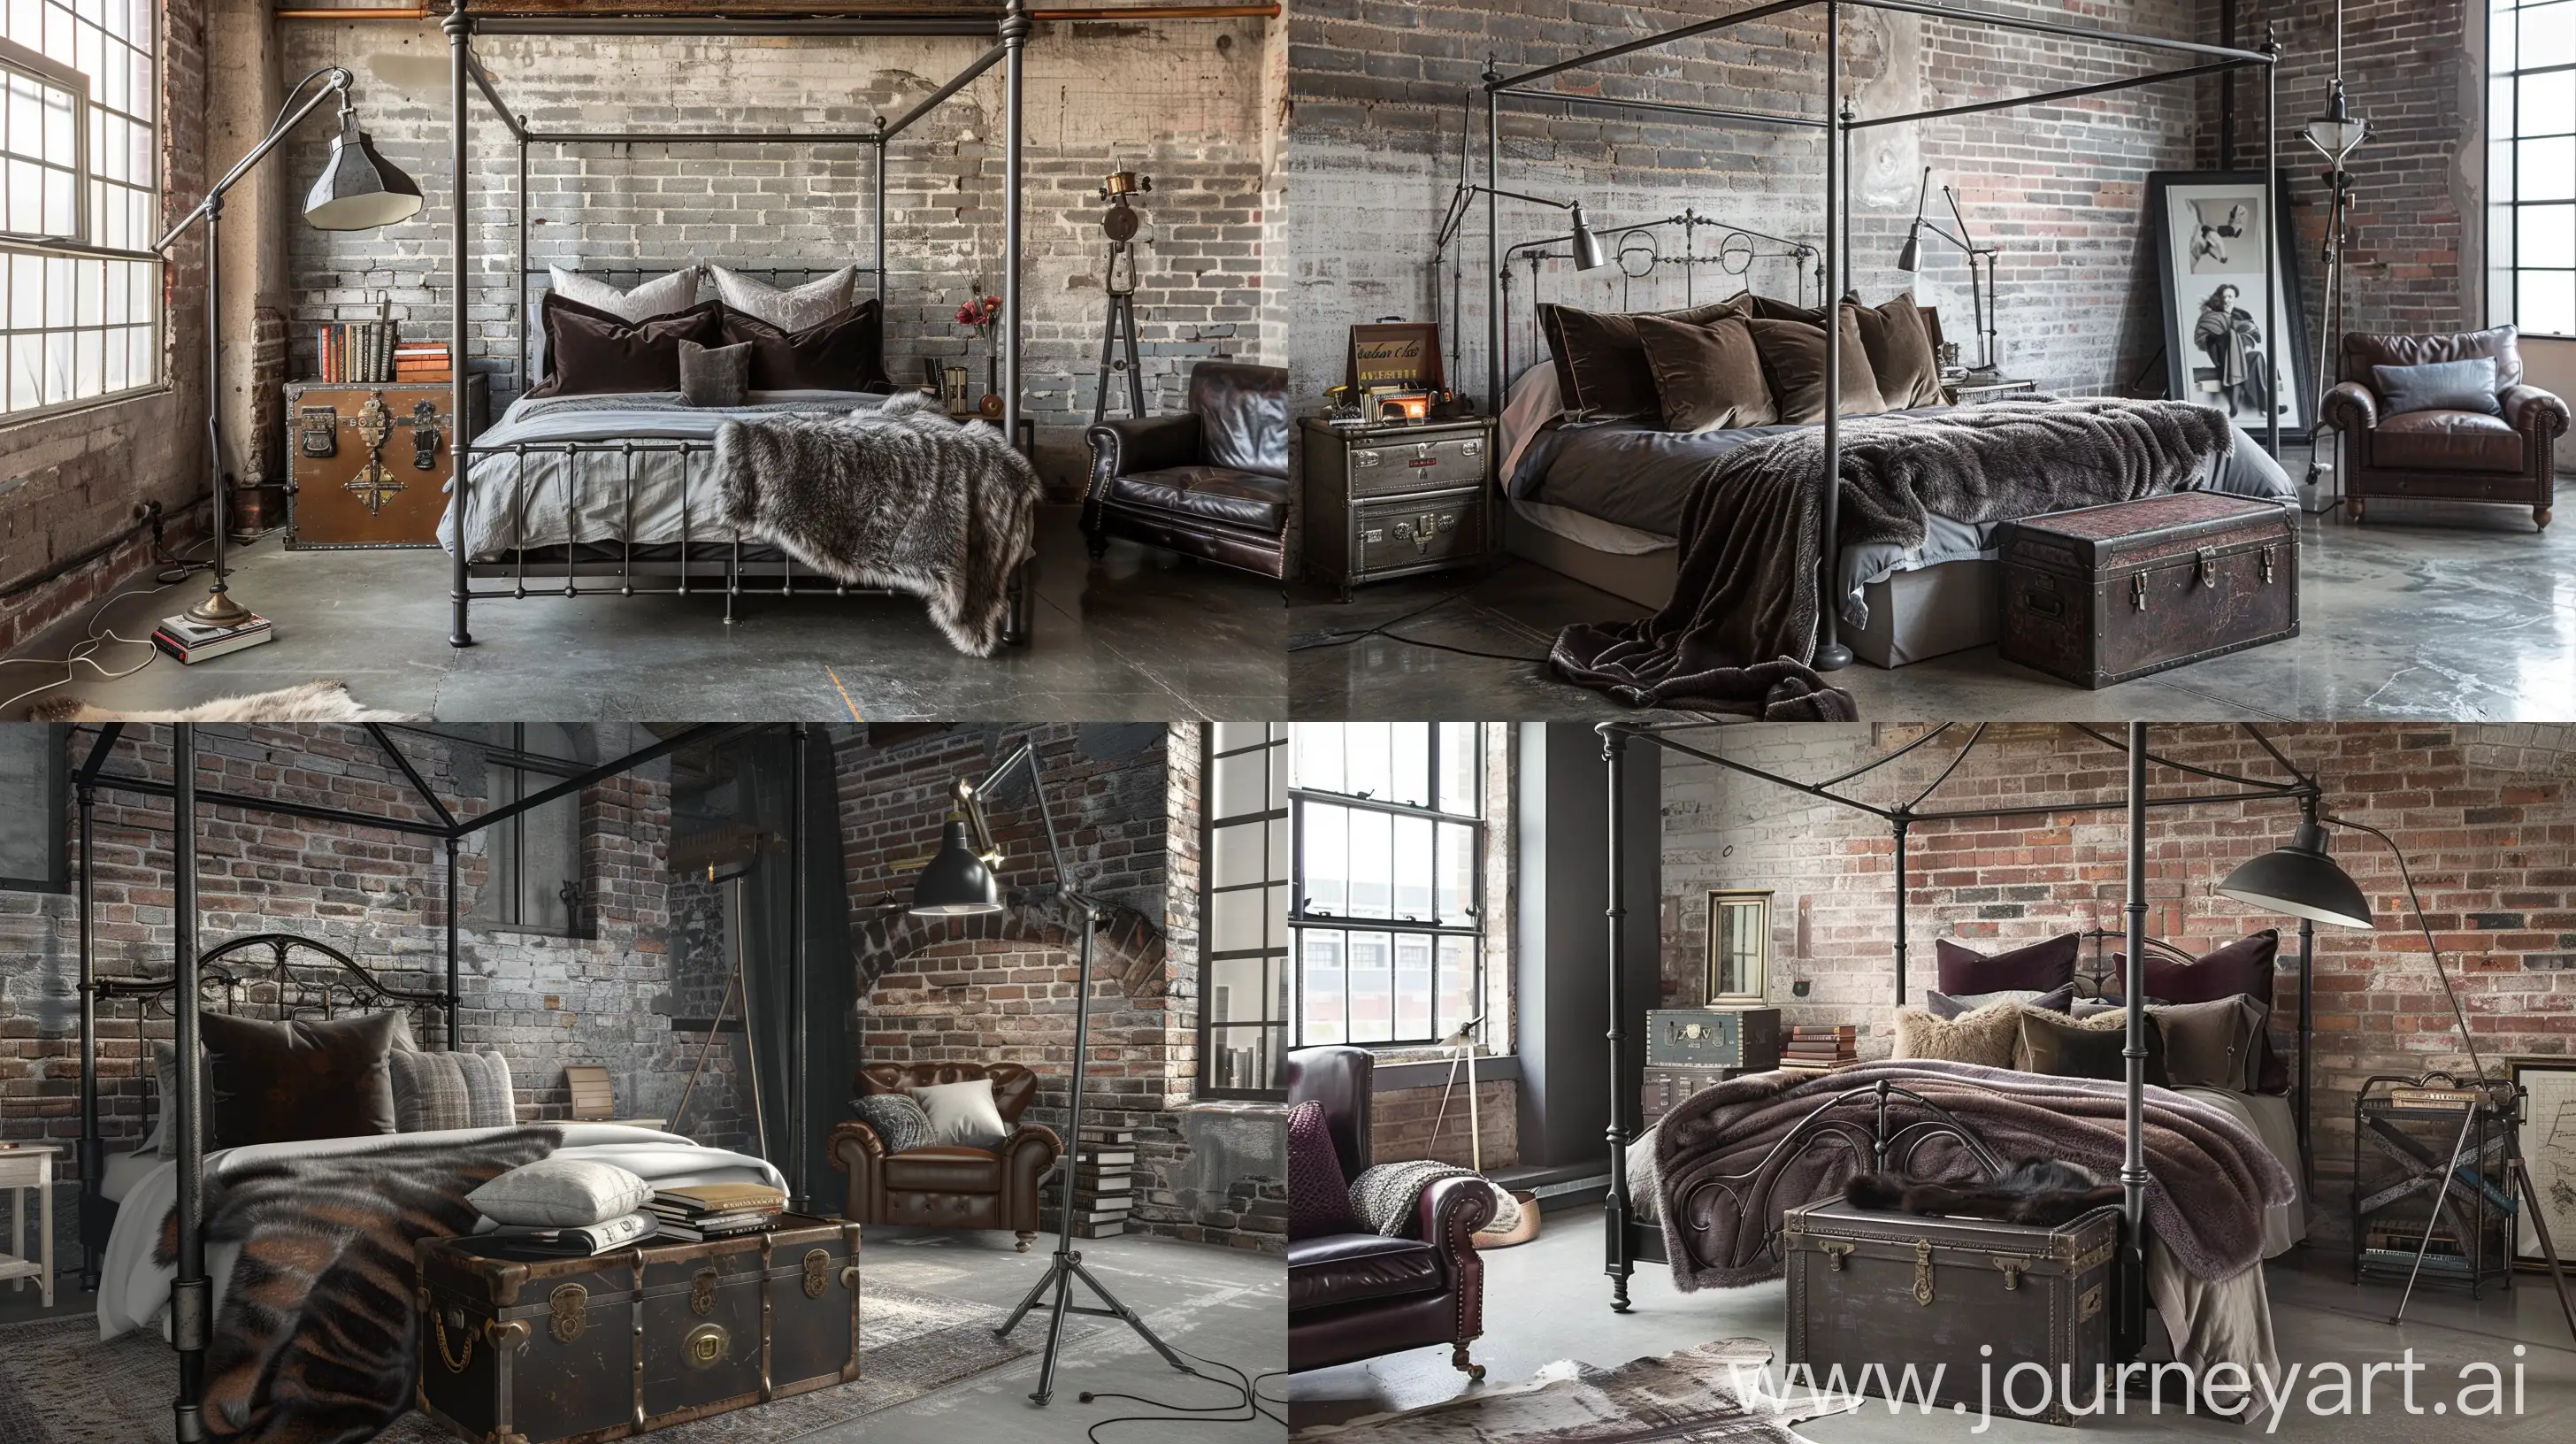 Visualize a loft-style bedroom with exposed brick walls, polished concrete floors, and a large, wrought iron canopy bed. Plush velvet throw pillows and a luxurious faux fur throw blanket add a touch of opulence, while a vintage steamer trunk serves as a stylish bedside table. An oversized industrial floor lamp casts a warm glow over a cozy reading nook, complete with a leather armchair and a stack of well-loved books, Moody charcoal gray, warm cognac brown, and hints of metallic silver. --ar 16:9